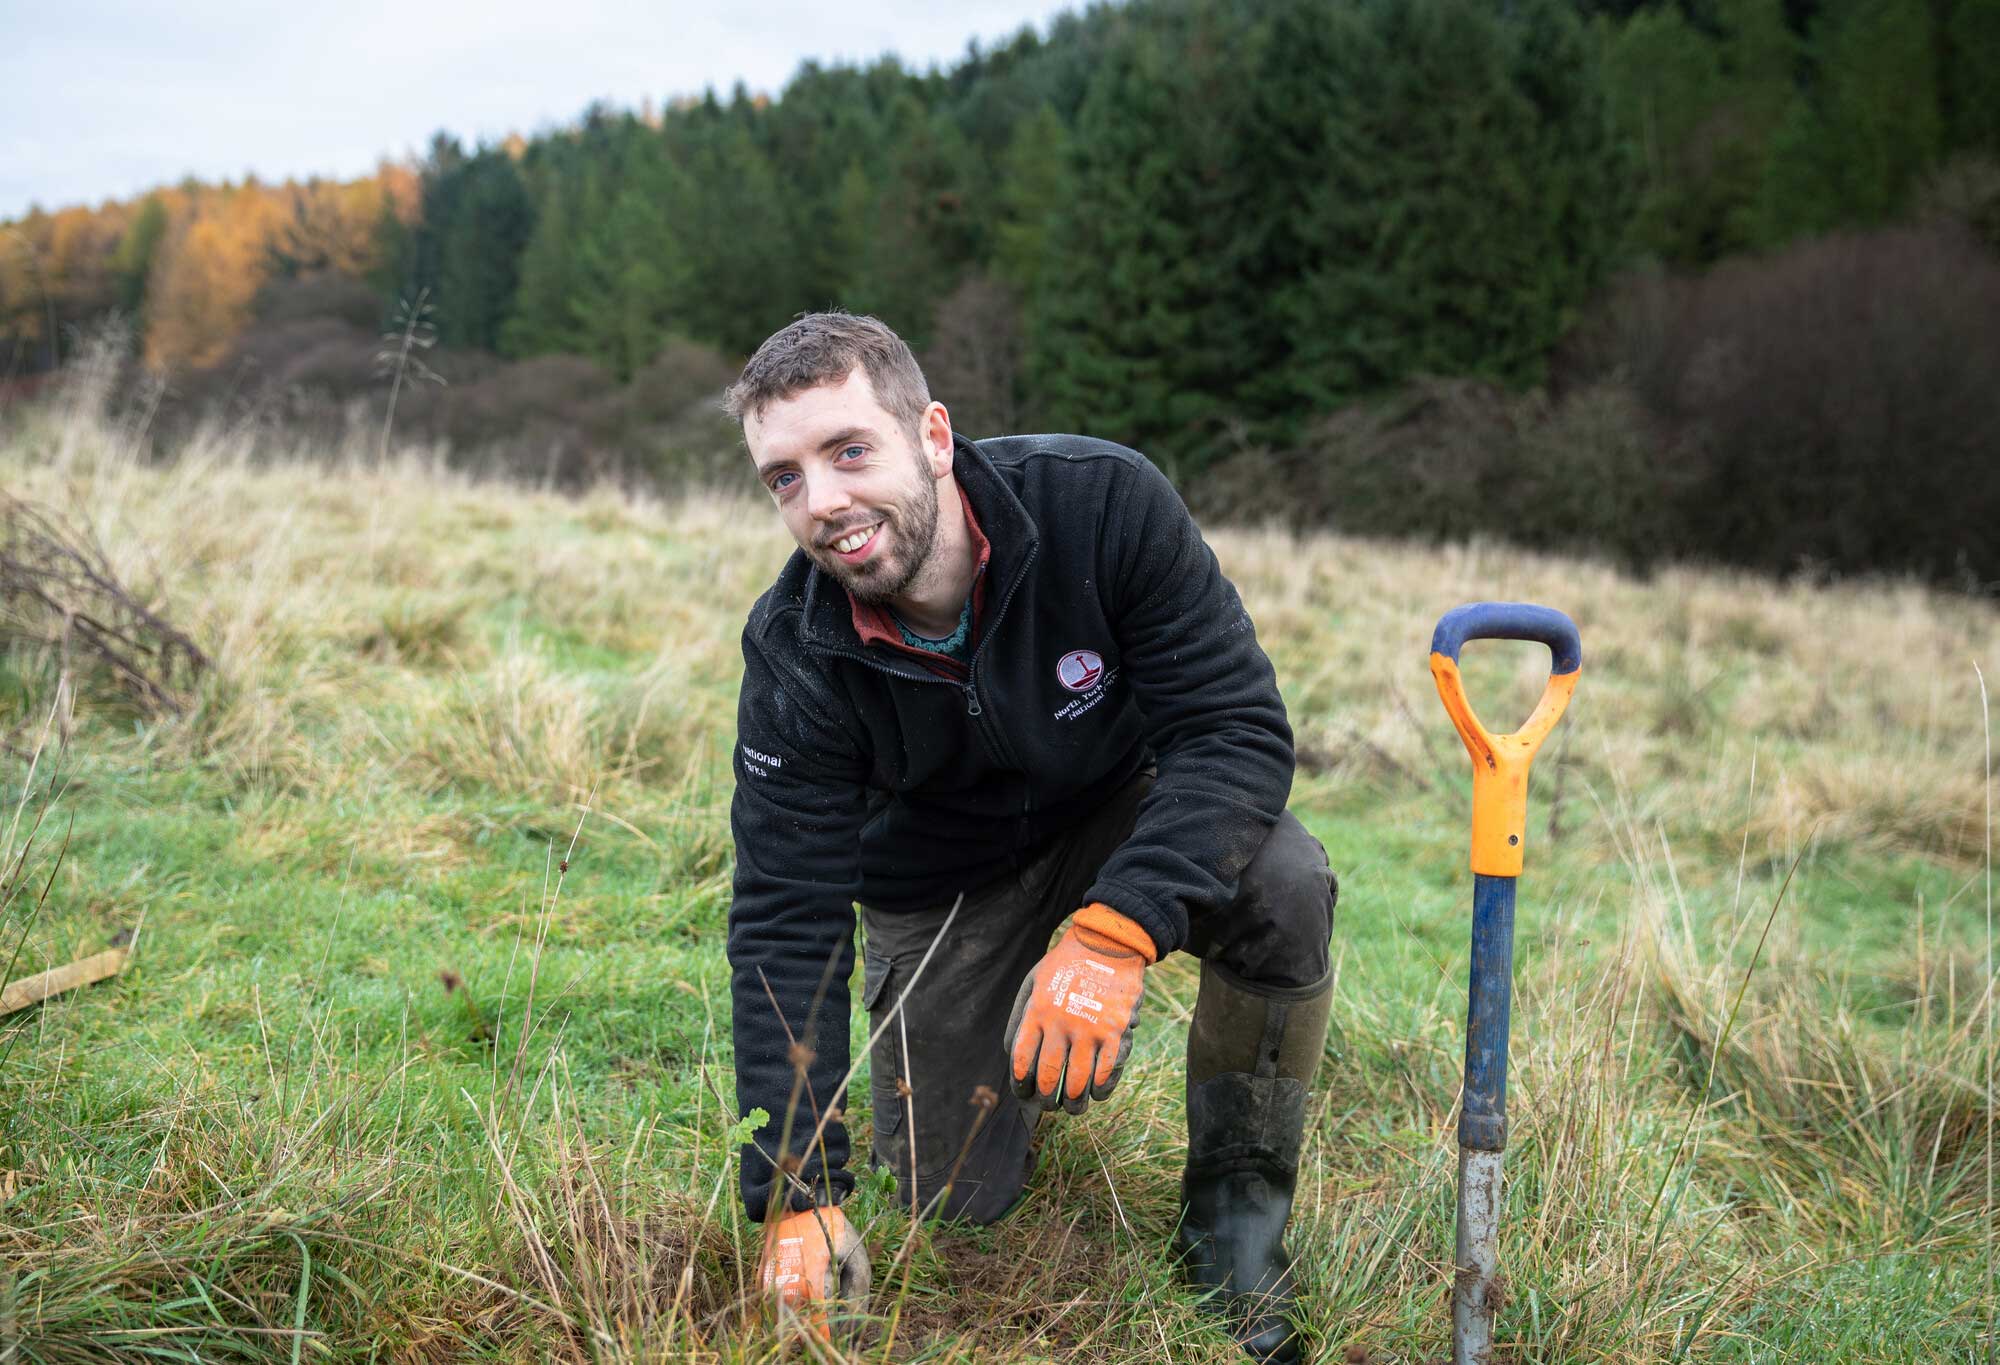 Woodland operation trainee Joseph planting a tree in a field. Credit Charlie Fox / NYMNPA.